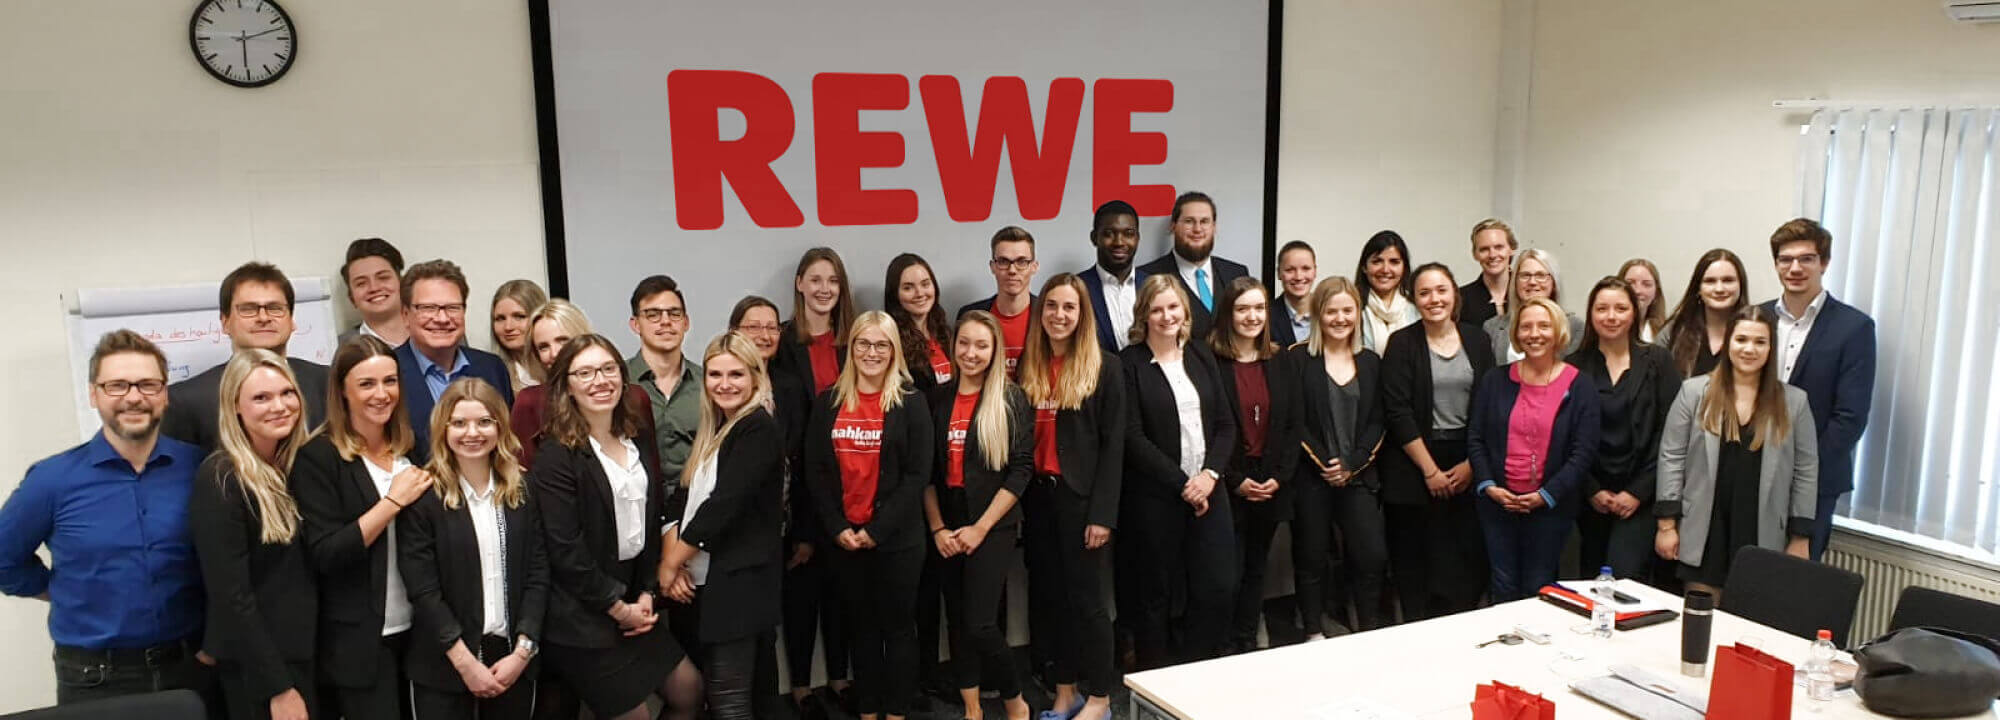 Focus on HR cases: Joint business project with REWE